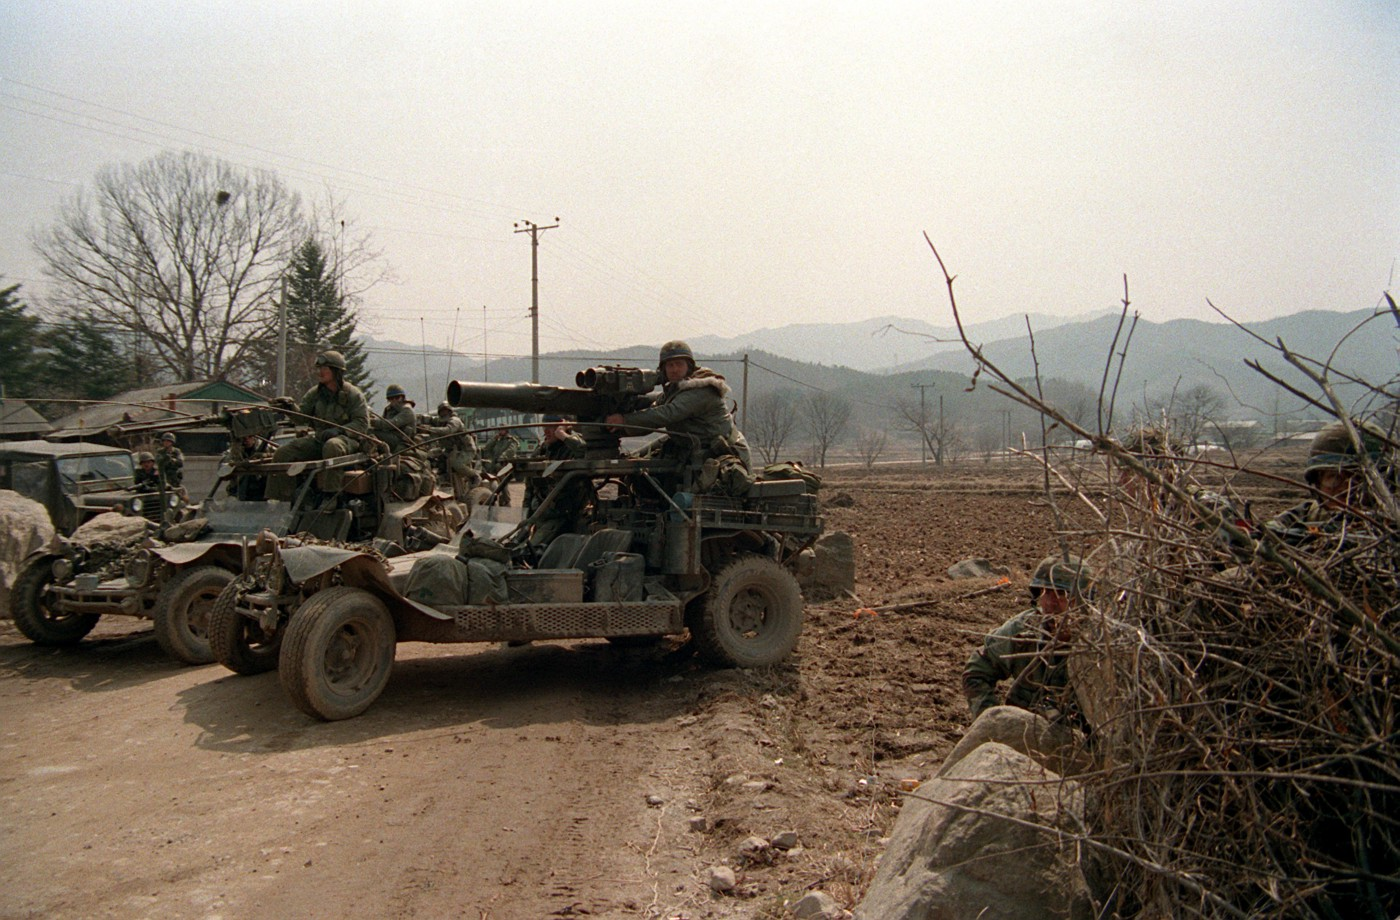 A Chenowth Racing Products Fast Attack Vehicle (FAV) equipped with a TOW anti-tank missile, in front, and another with a .50 caliber M2 machine gun behind it. Army photo